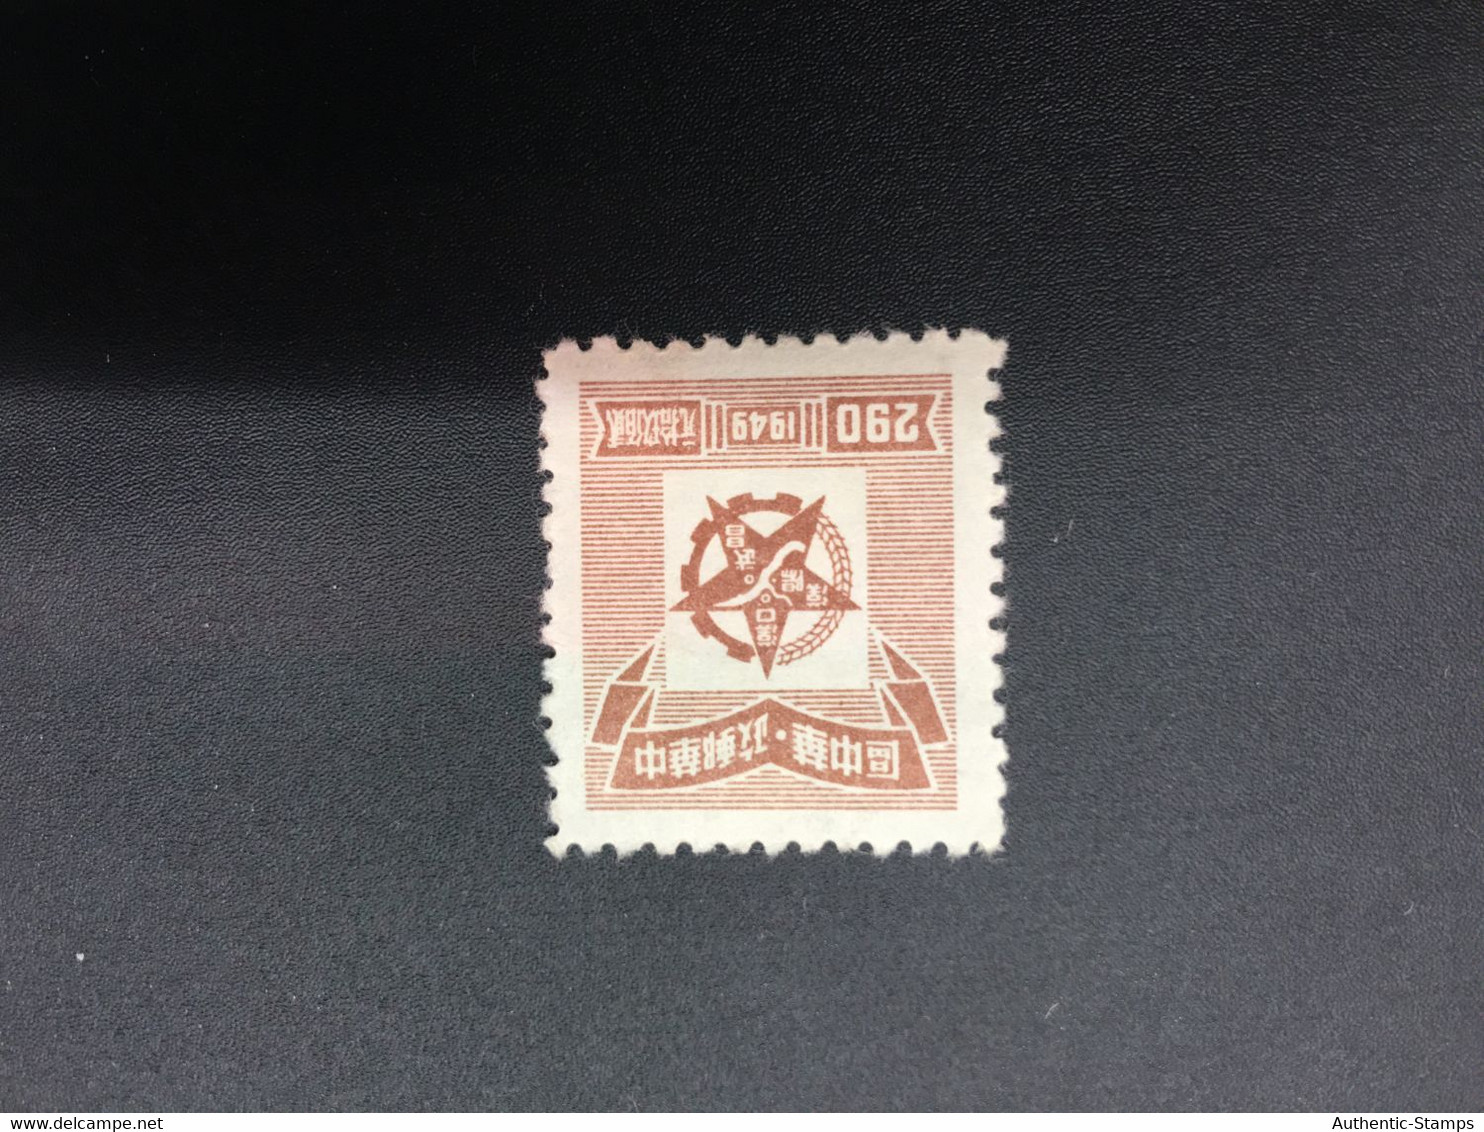 CHINA STAMP,  Unused, TIMBRO, STEMPEL,  CINA, CHINE, LIST 7818 - Chine Centrale 1948-49